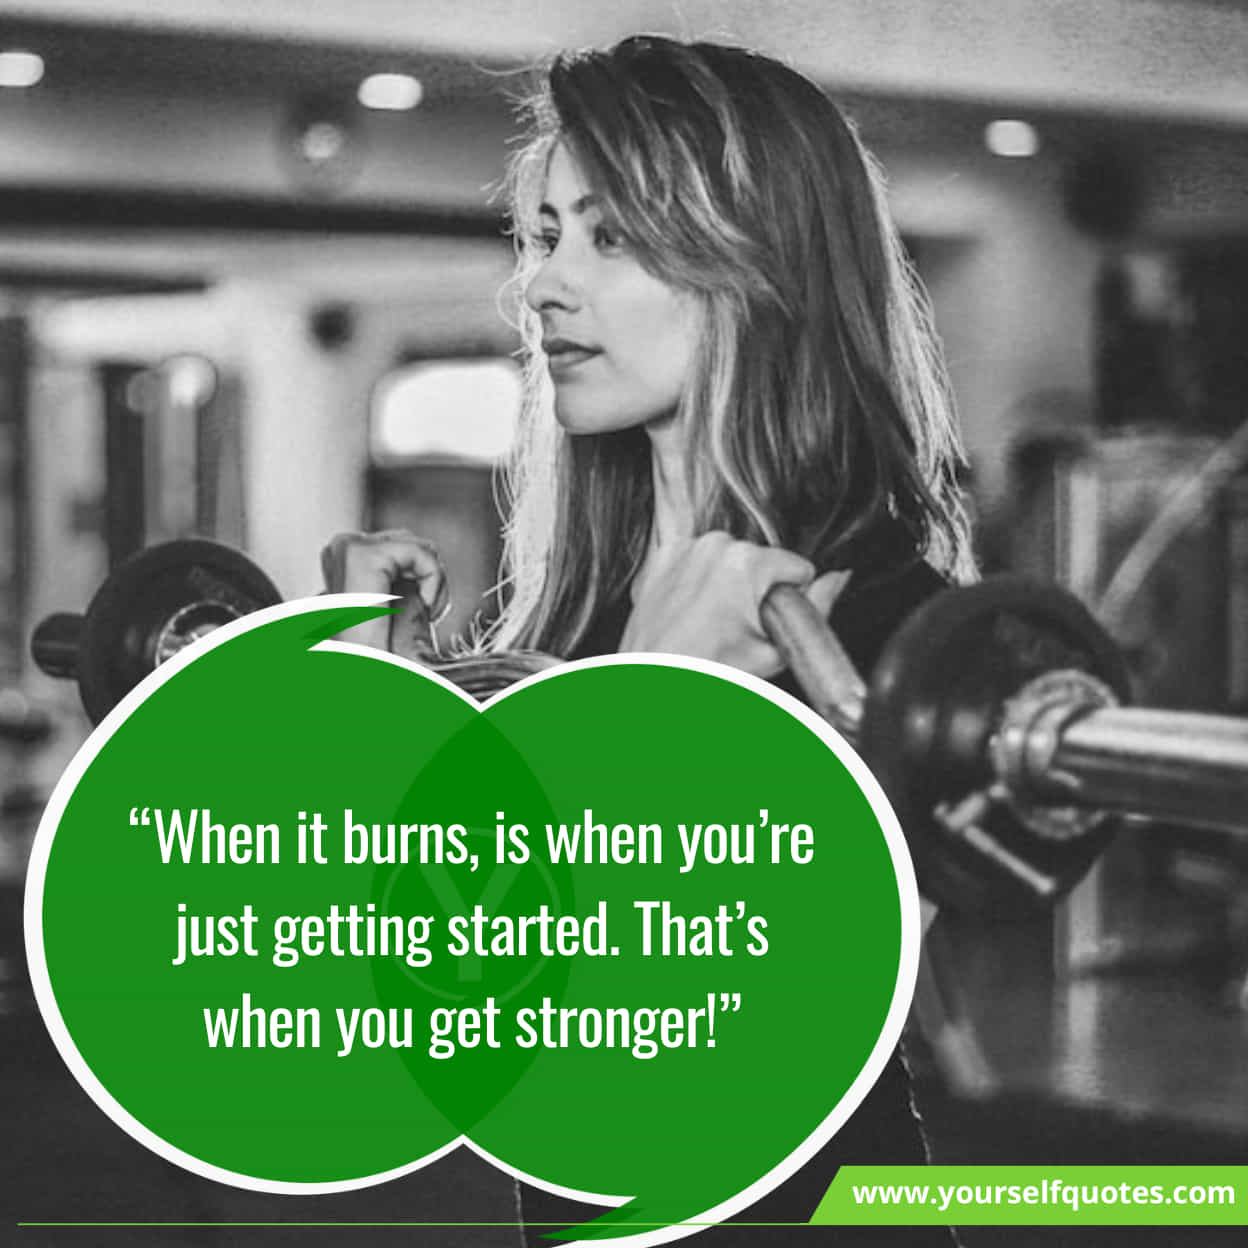 Famous Inspirational Quotes For Weight-Loss